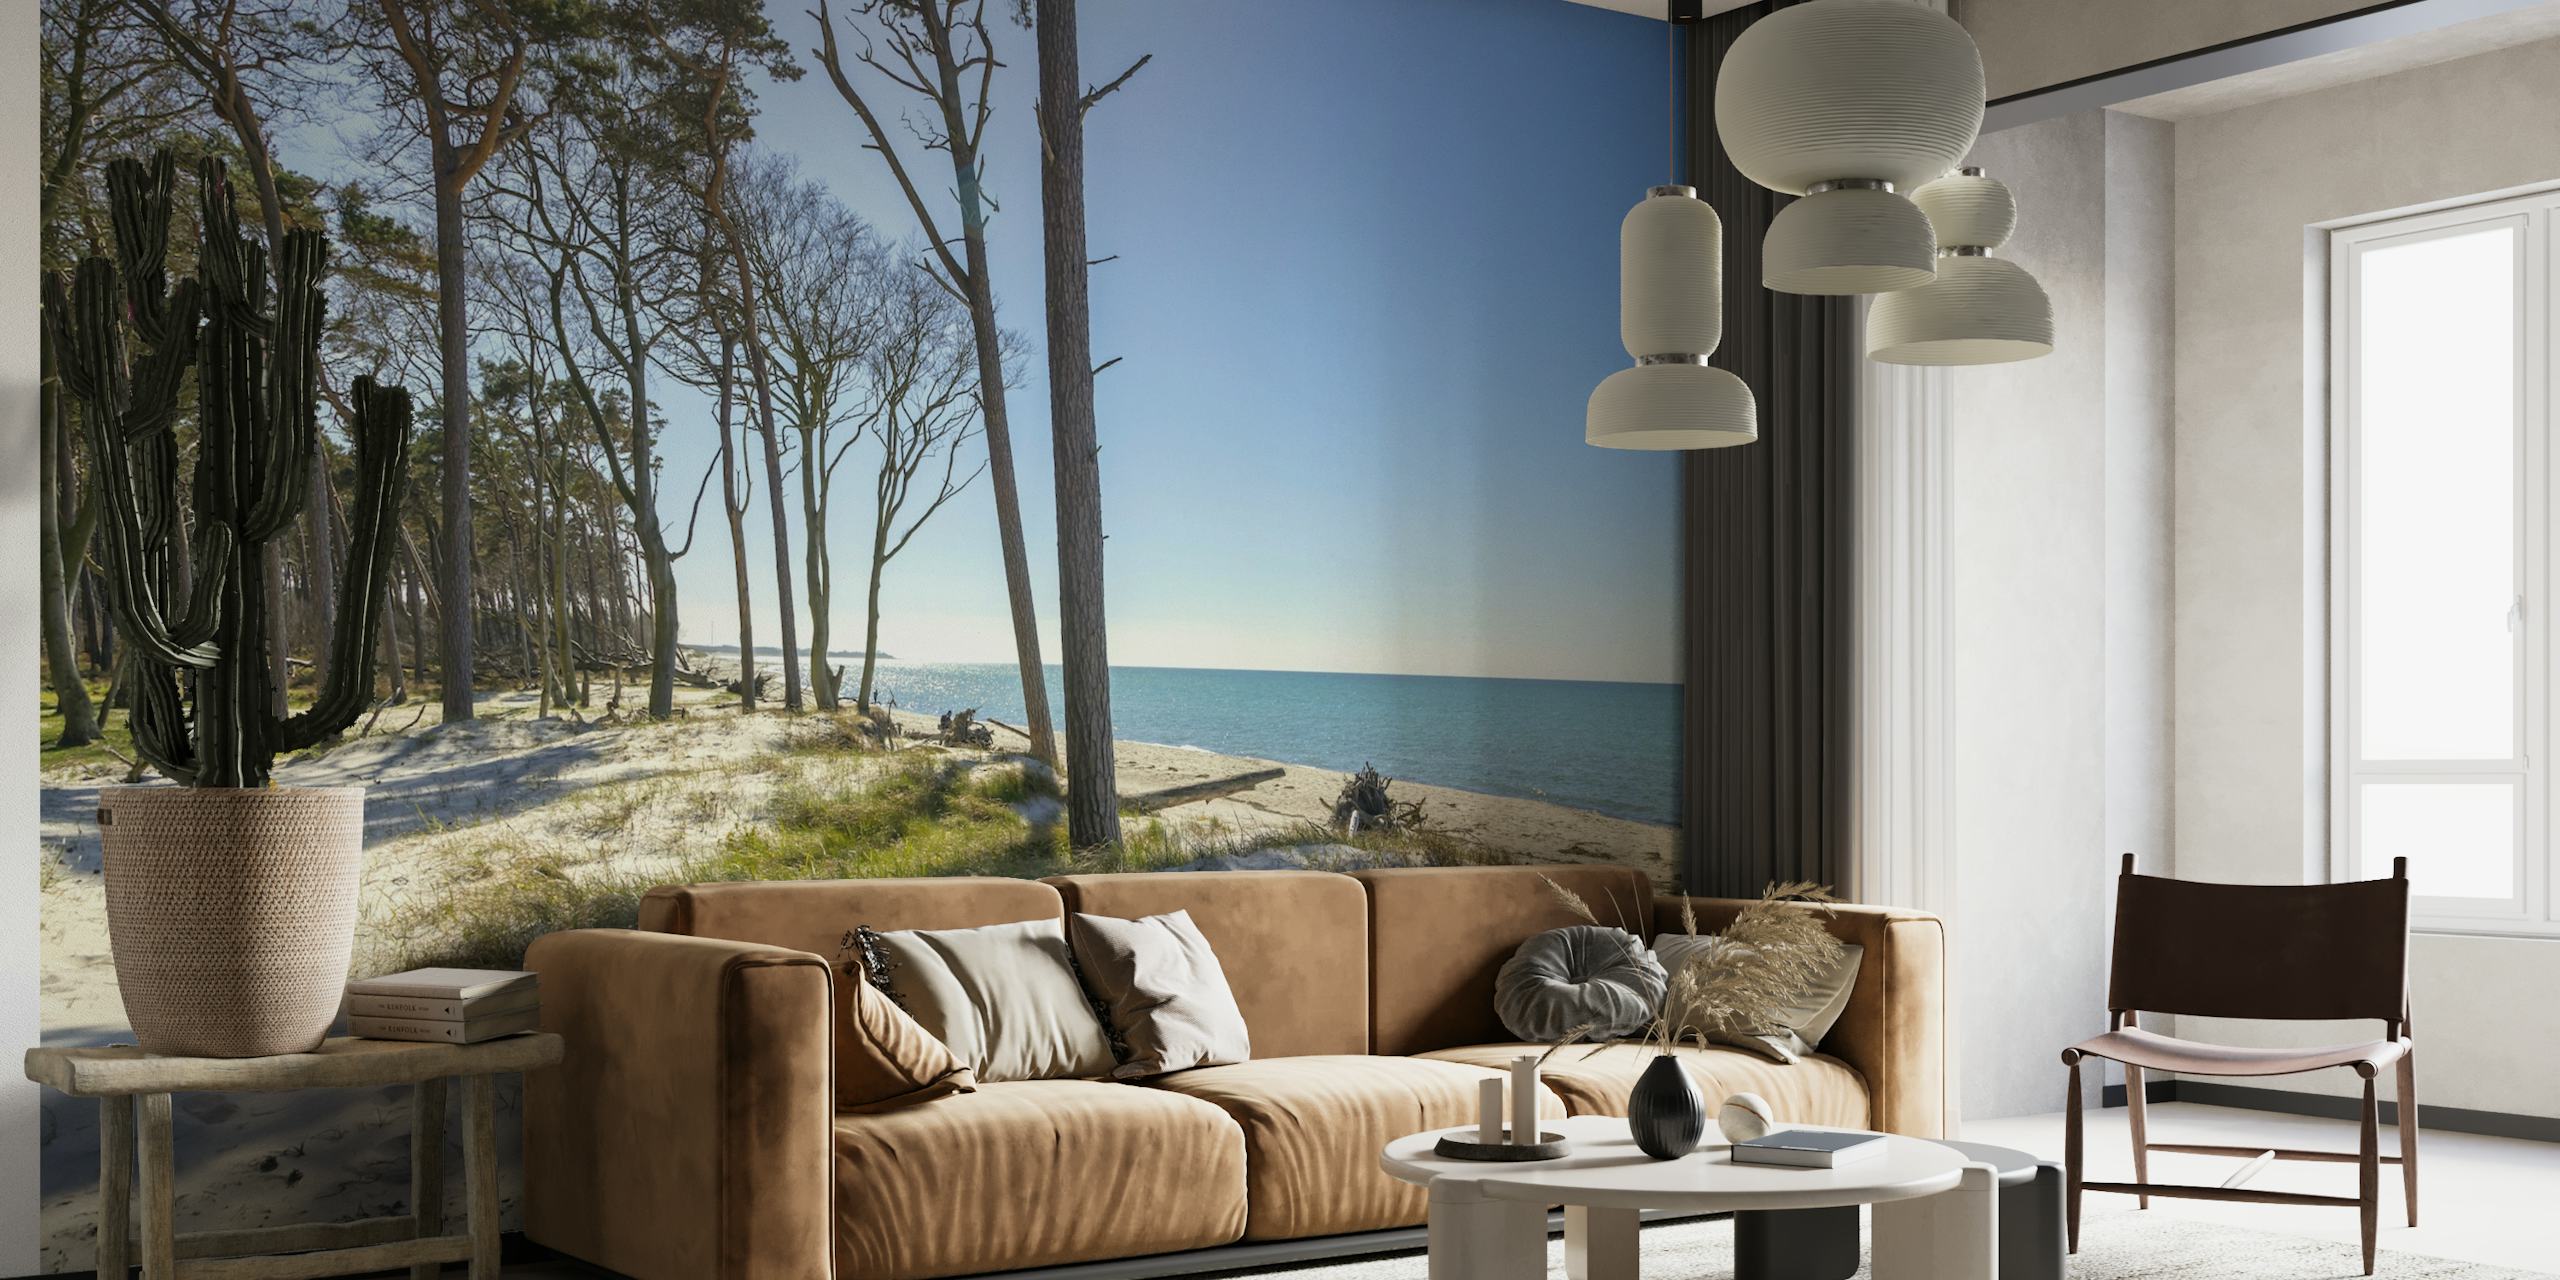 Wall mural depicting a sunny day at the Baltic Sea beach with tall trees and a clear blue sky